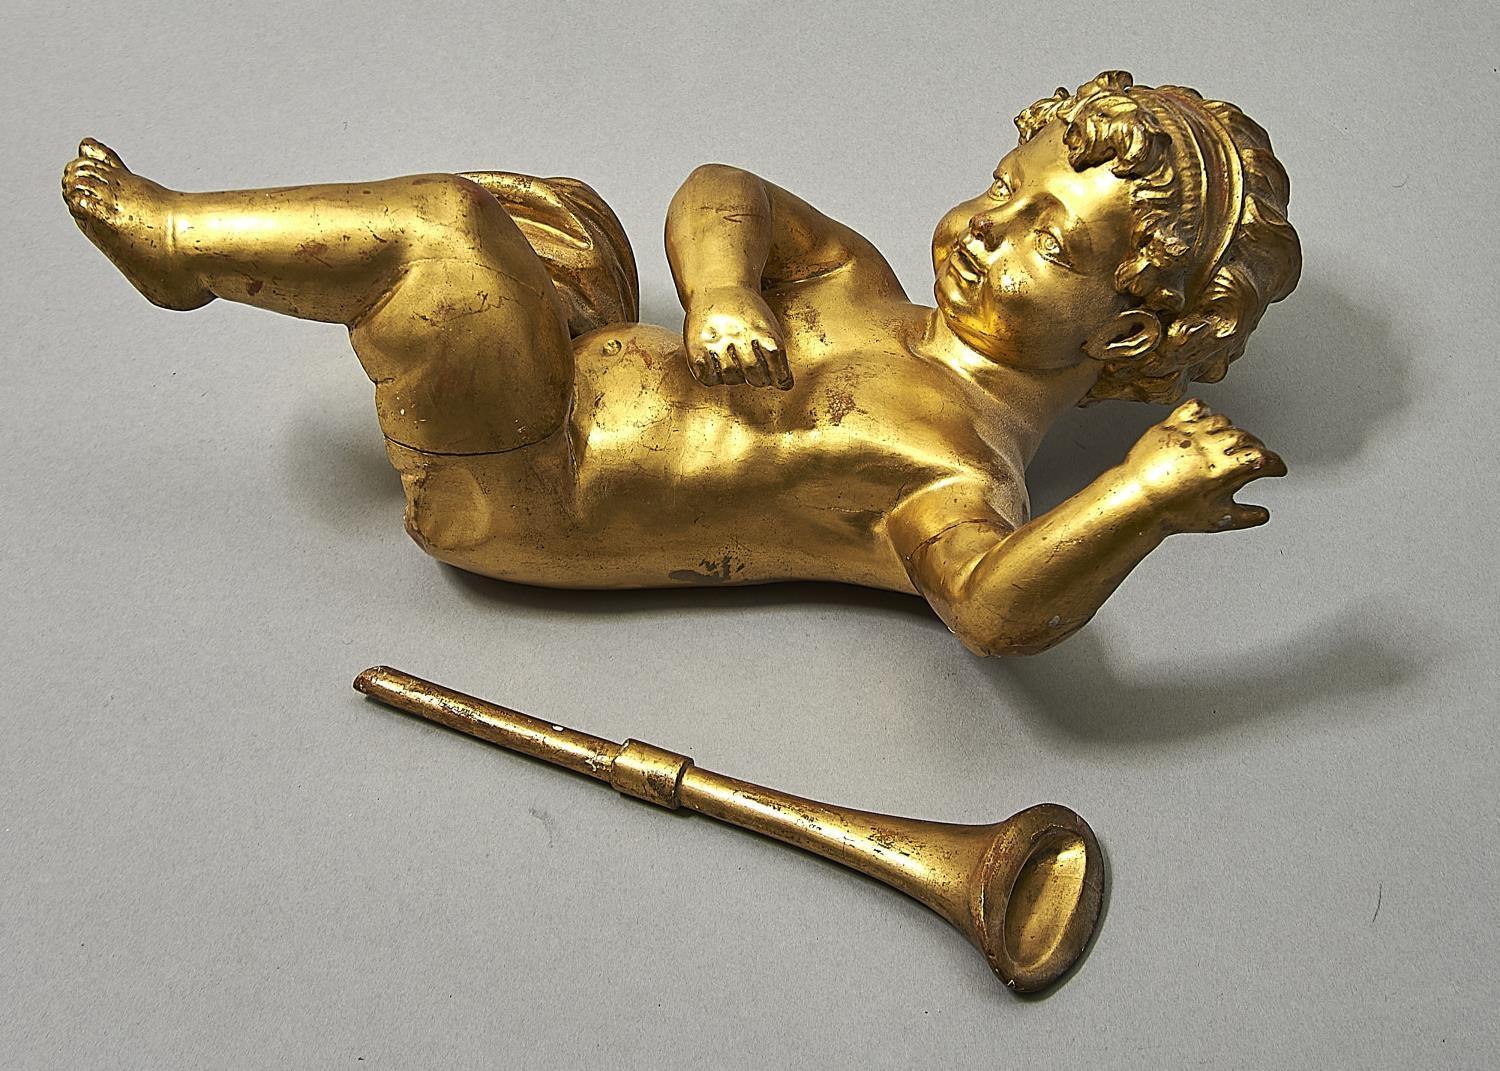 A GILTWOOD FIGURE OF A CHILD, 19TH/20TH C, HOLDING A TRUMPET, 39CM H Condition reportTrumpet